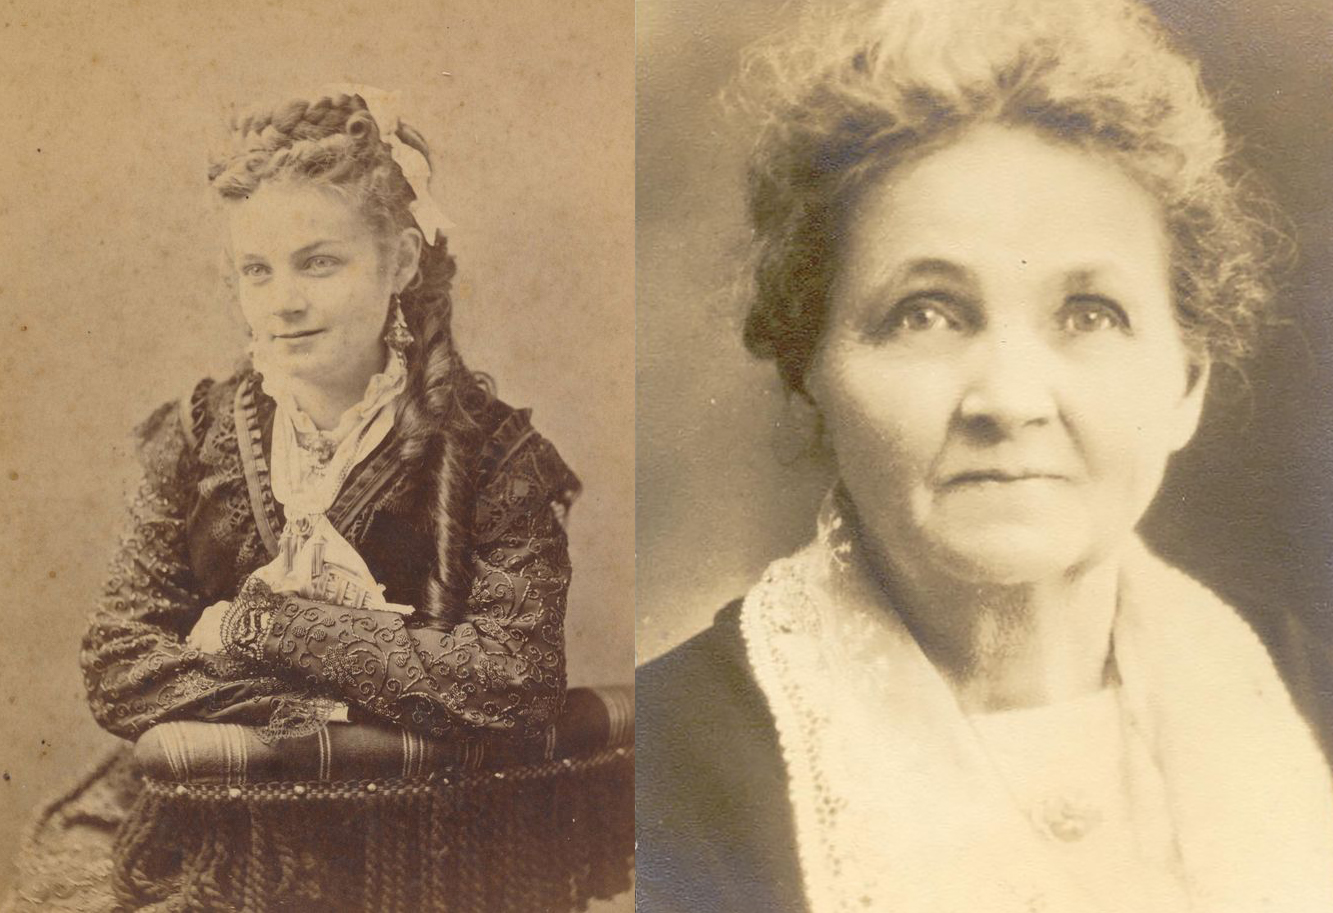 sepia toned black and white photos woman, on left she is a young woman, on right she is old, both are formal portraits